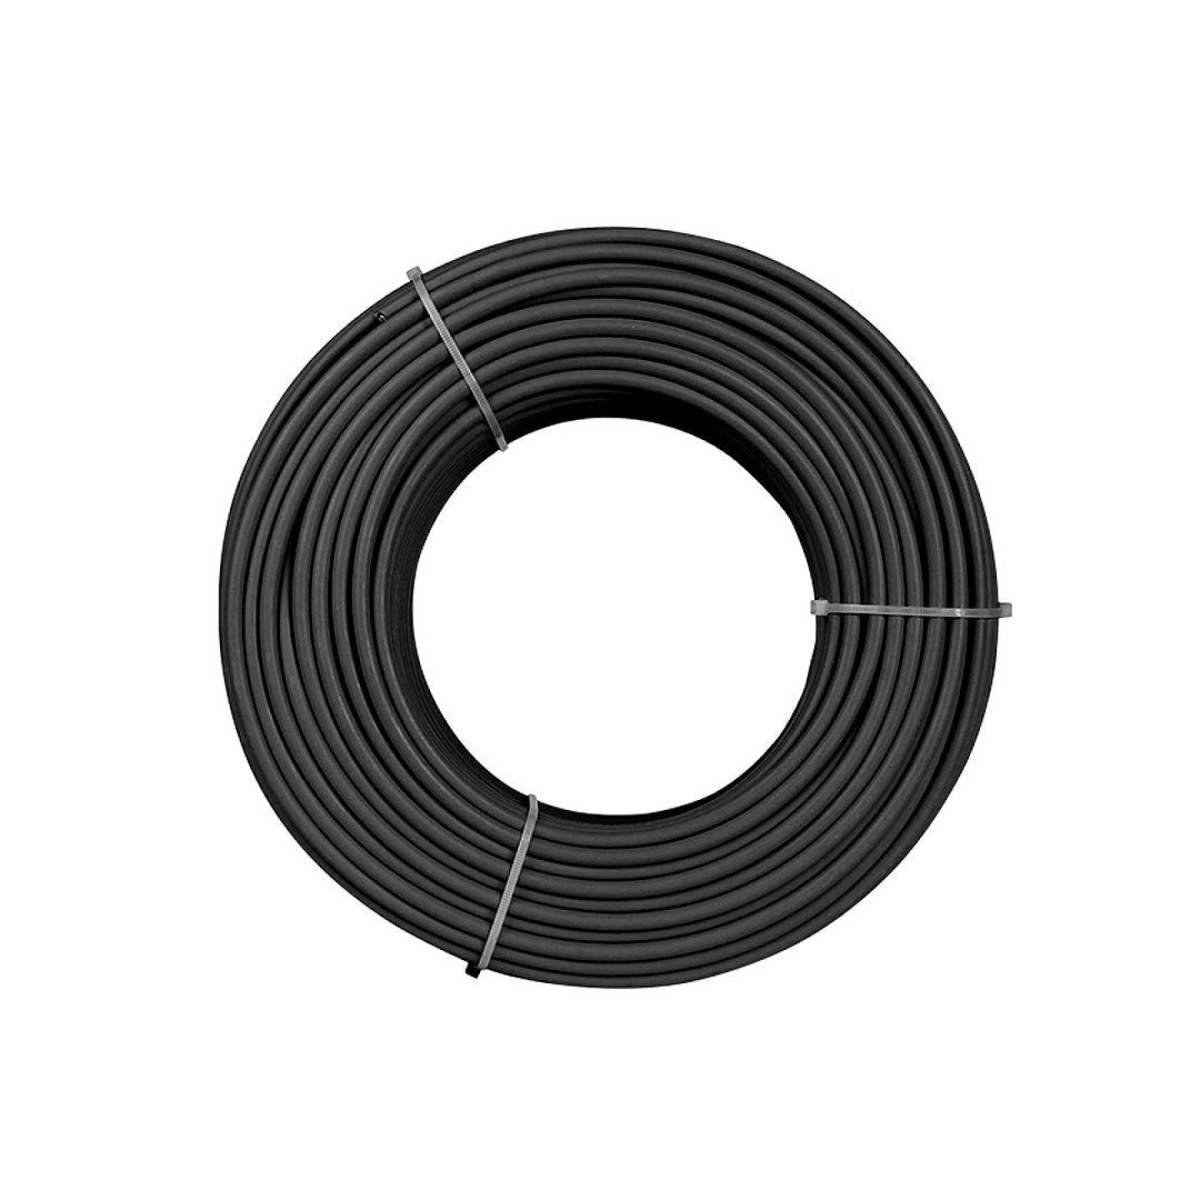 TommaTech 1.5mm² Solar Cable 1 Meter